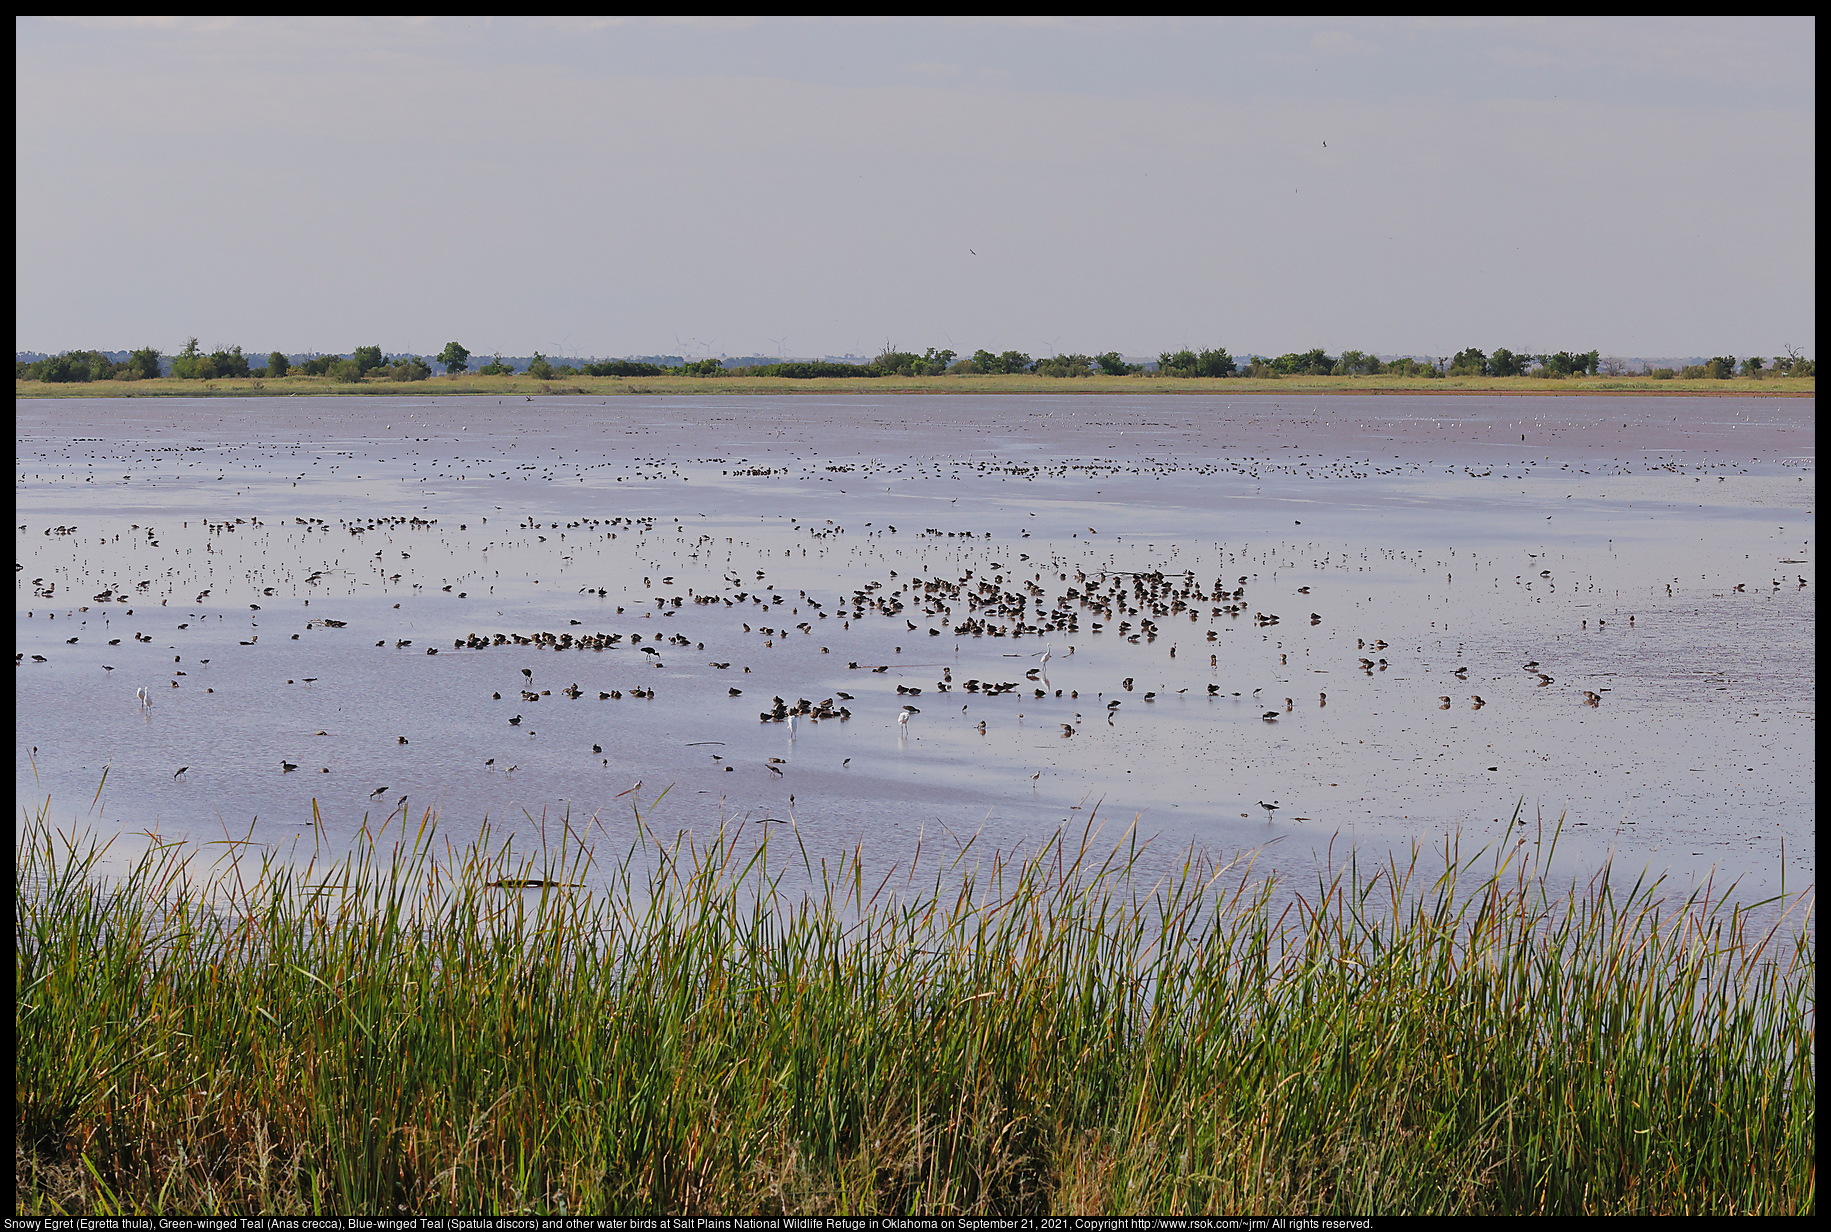 Snowy Egret (Egretta thula), Green-winged Teal (Anas crecca), Blue-winged Teal (Spatula discors) and other water birds at Salt Plains National Wildlife Refuge in Oklahoma on September 21, 2021